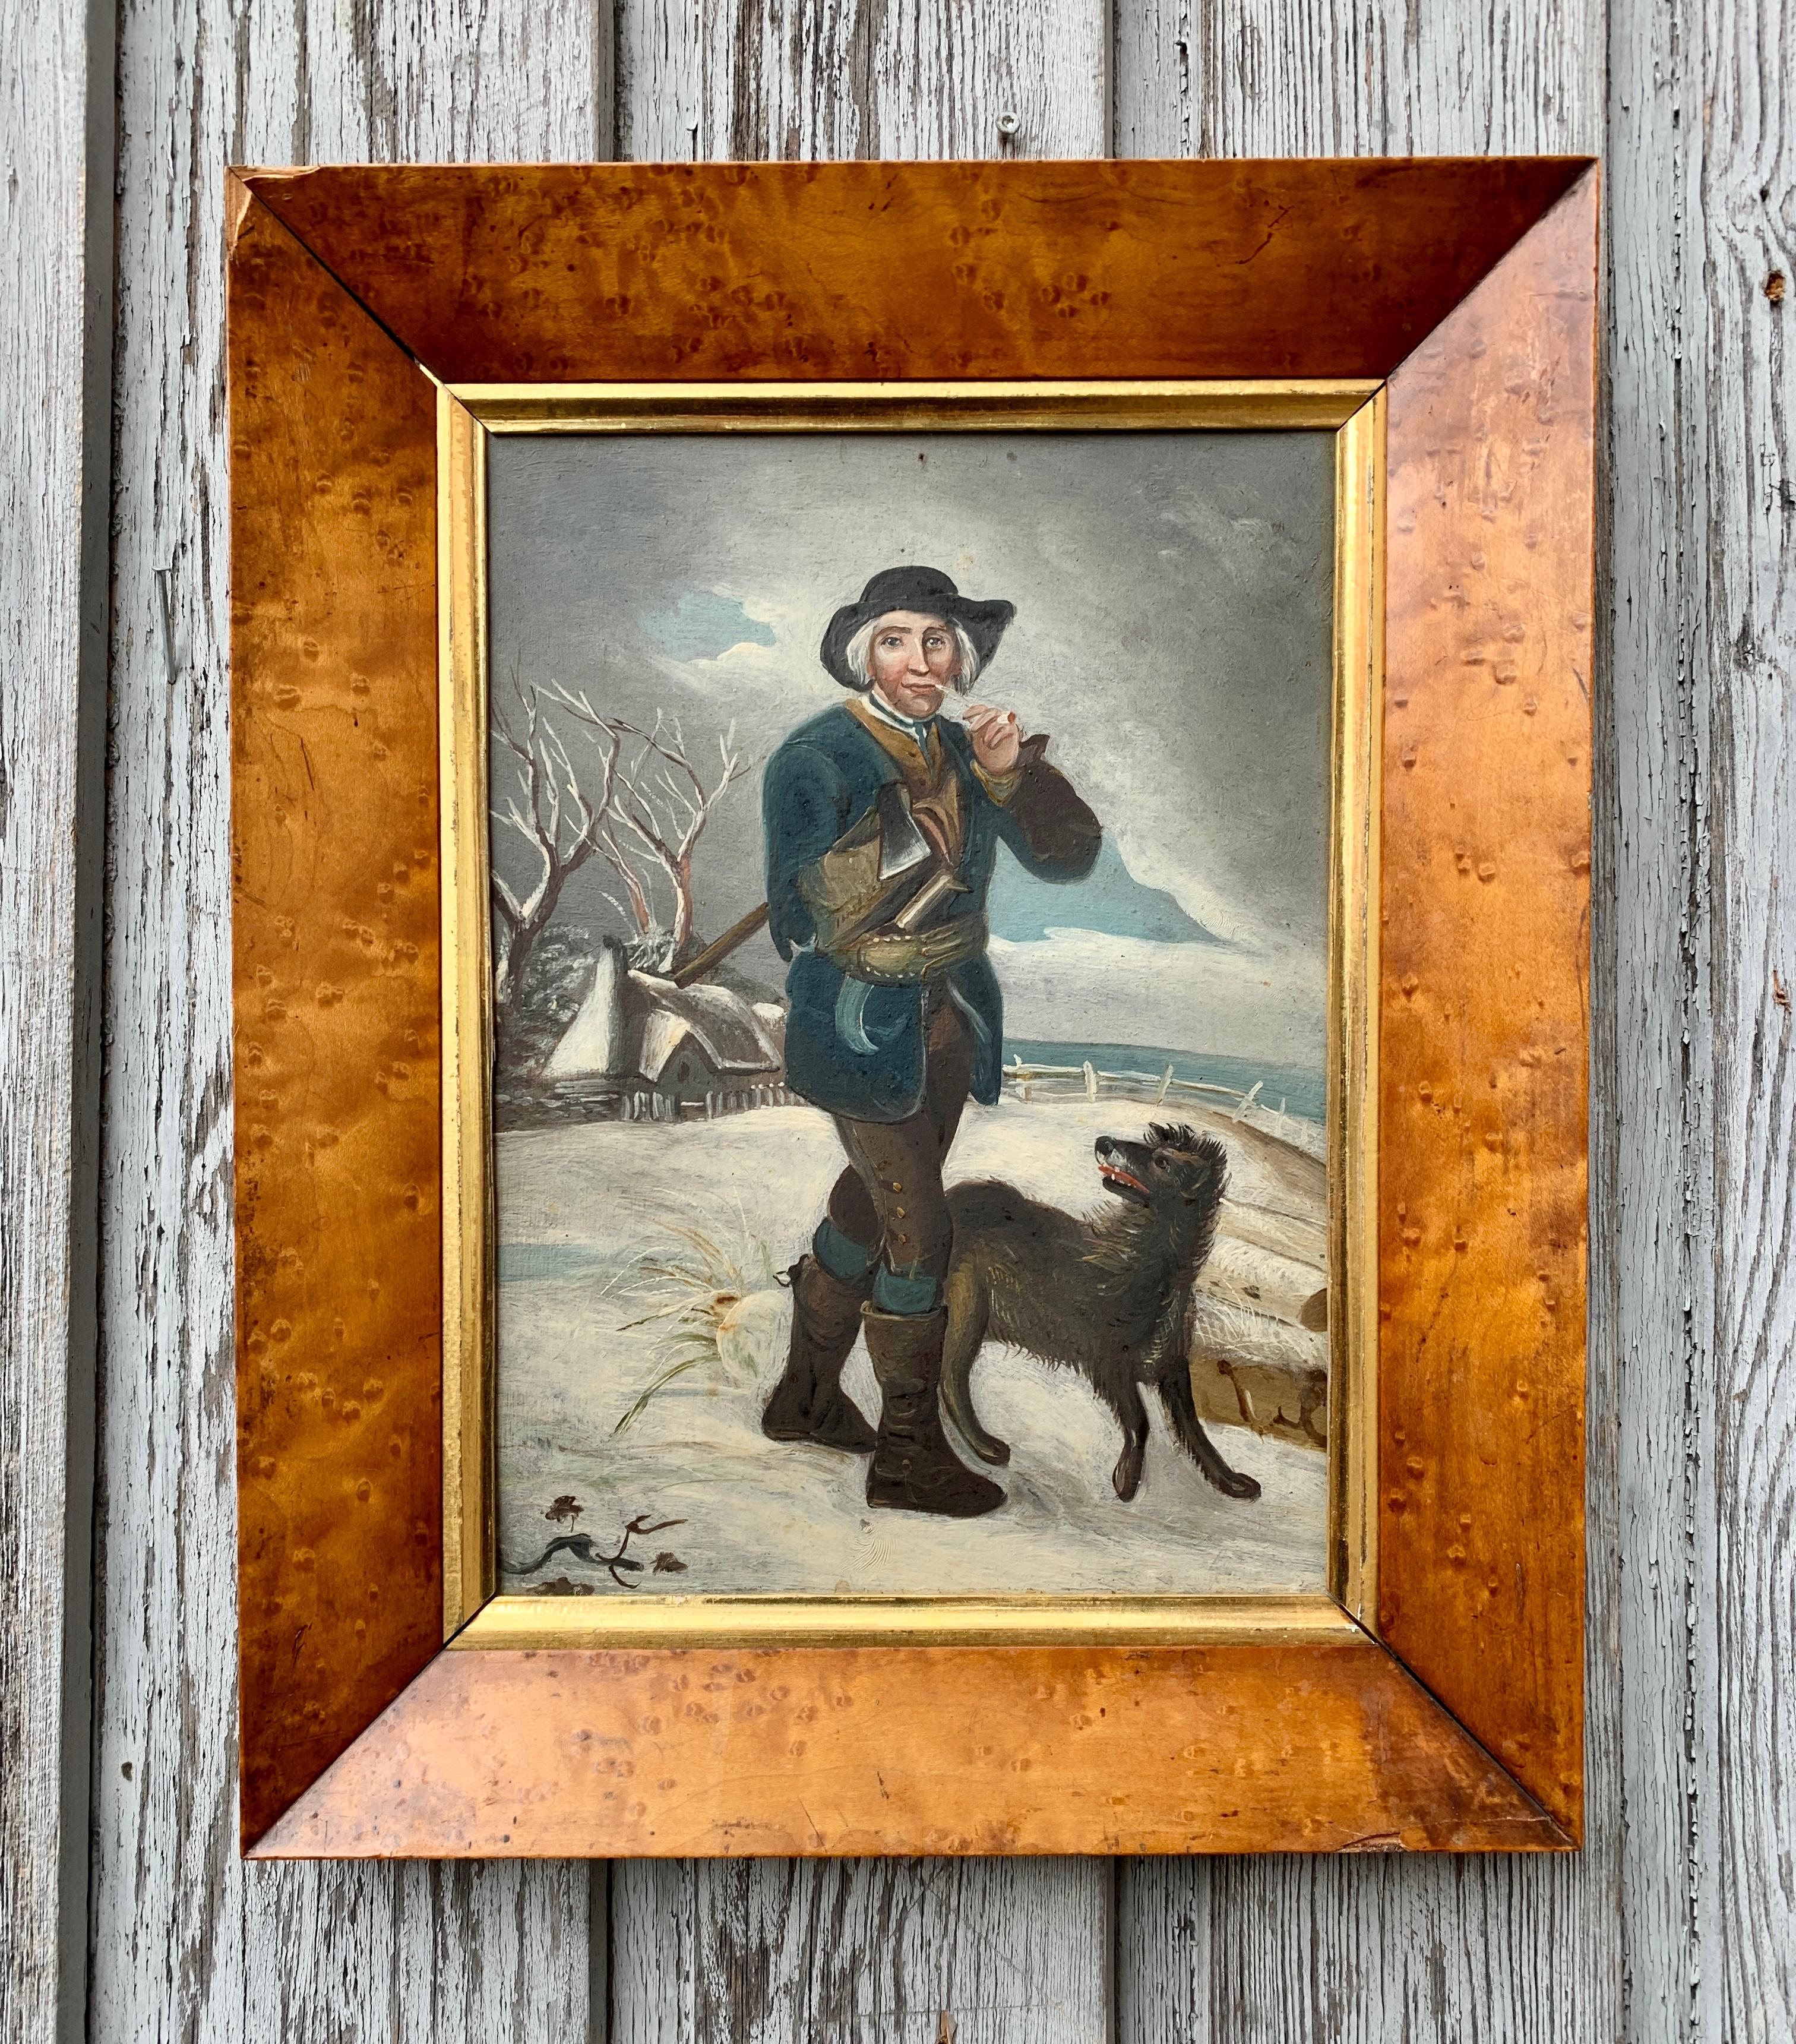 English 18th Century Oil Painting by George Morland of a MN with a Dog